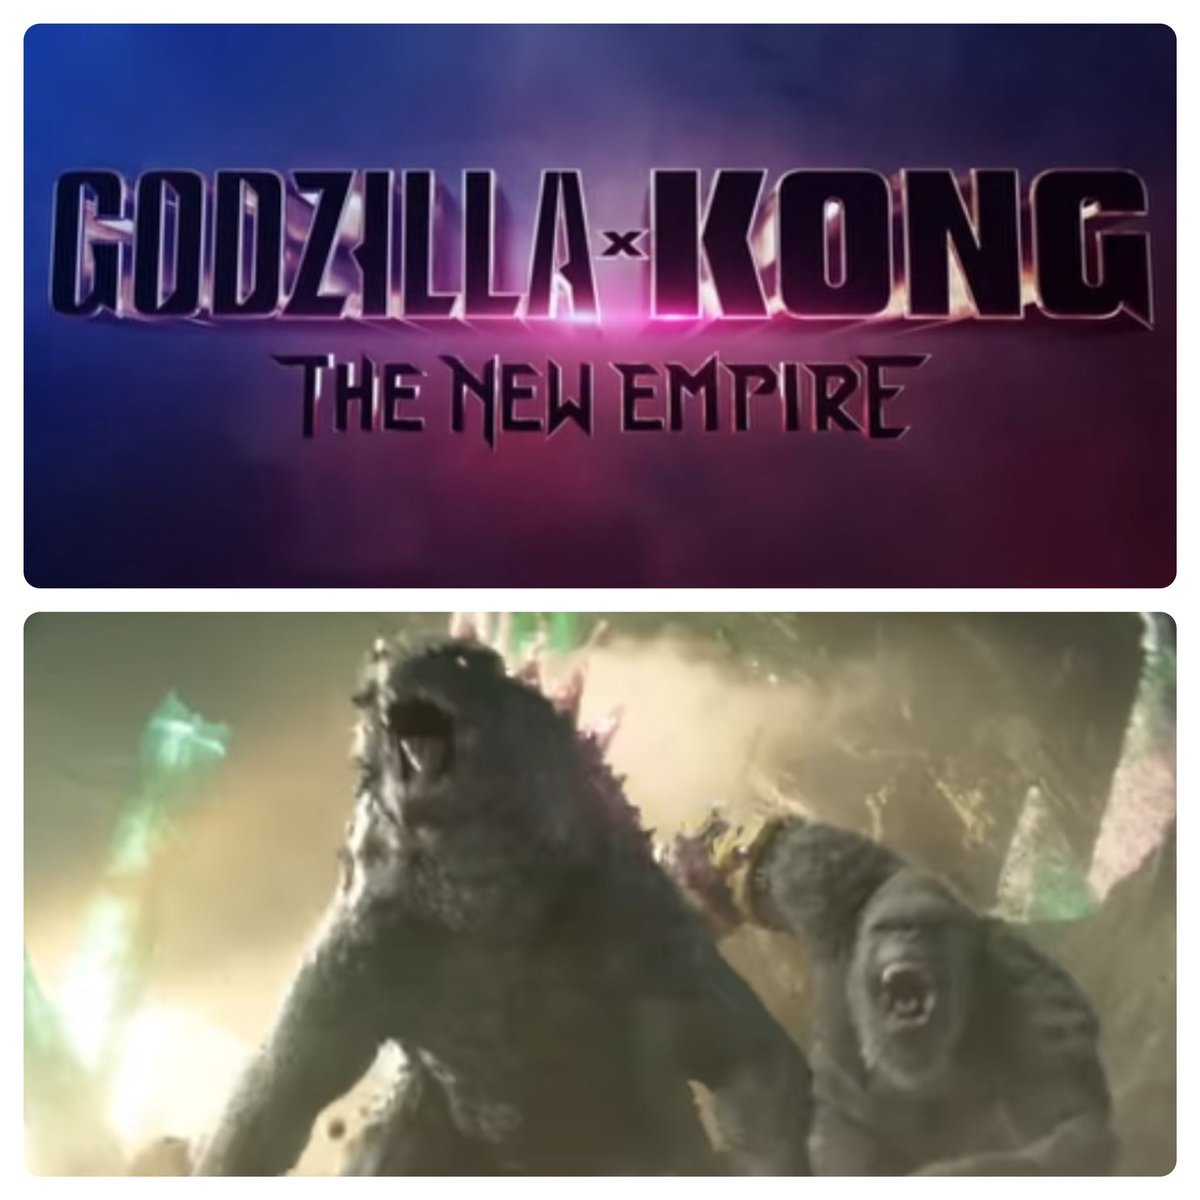 In Japan where I live, I watched #GodzillaxKongTheNewEmpire (#IMAX) in Theaters today. Especially, Supporting Role of #Mothra, #Suko, Jia ,Iwi, Trapper (played by Dan Stevens) could become the victory of #Godzilla X #Kong. #godzillaxkong #monsterverse #warnerbros #toho